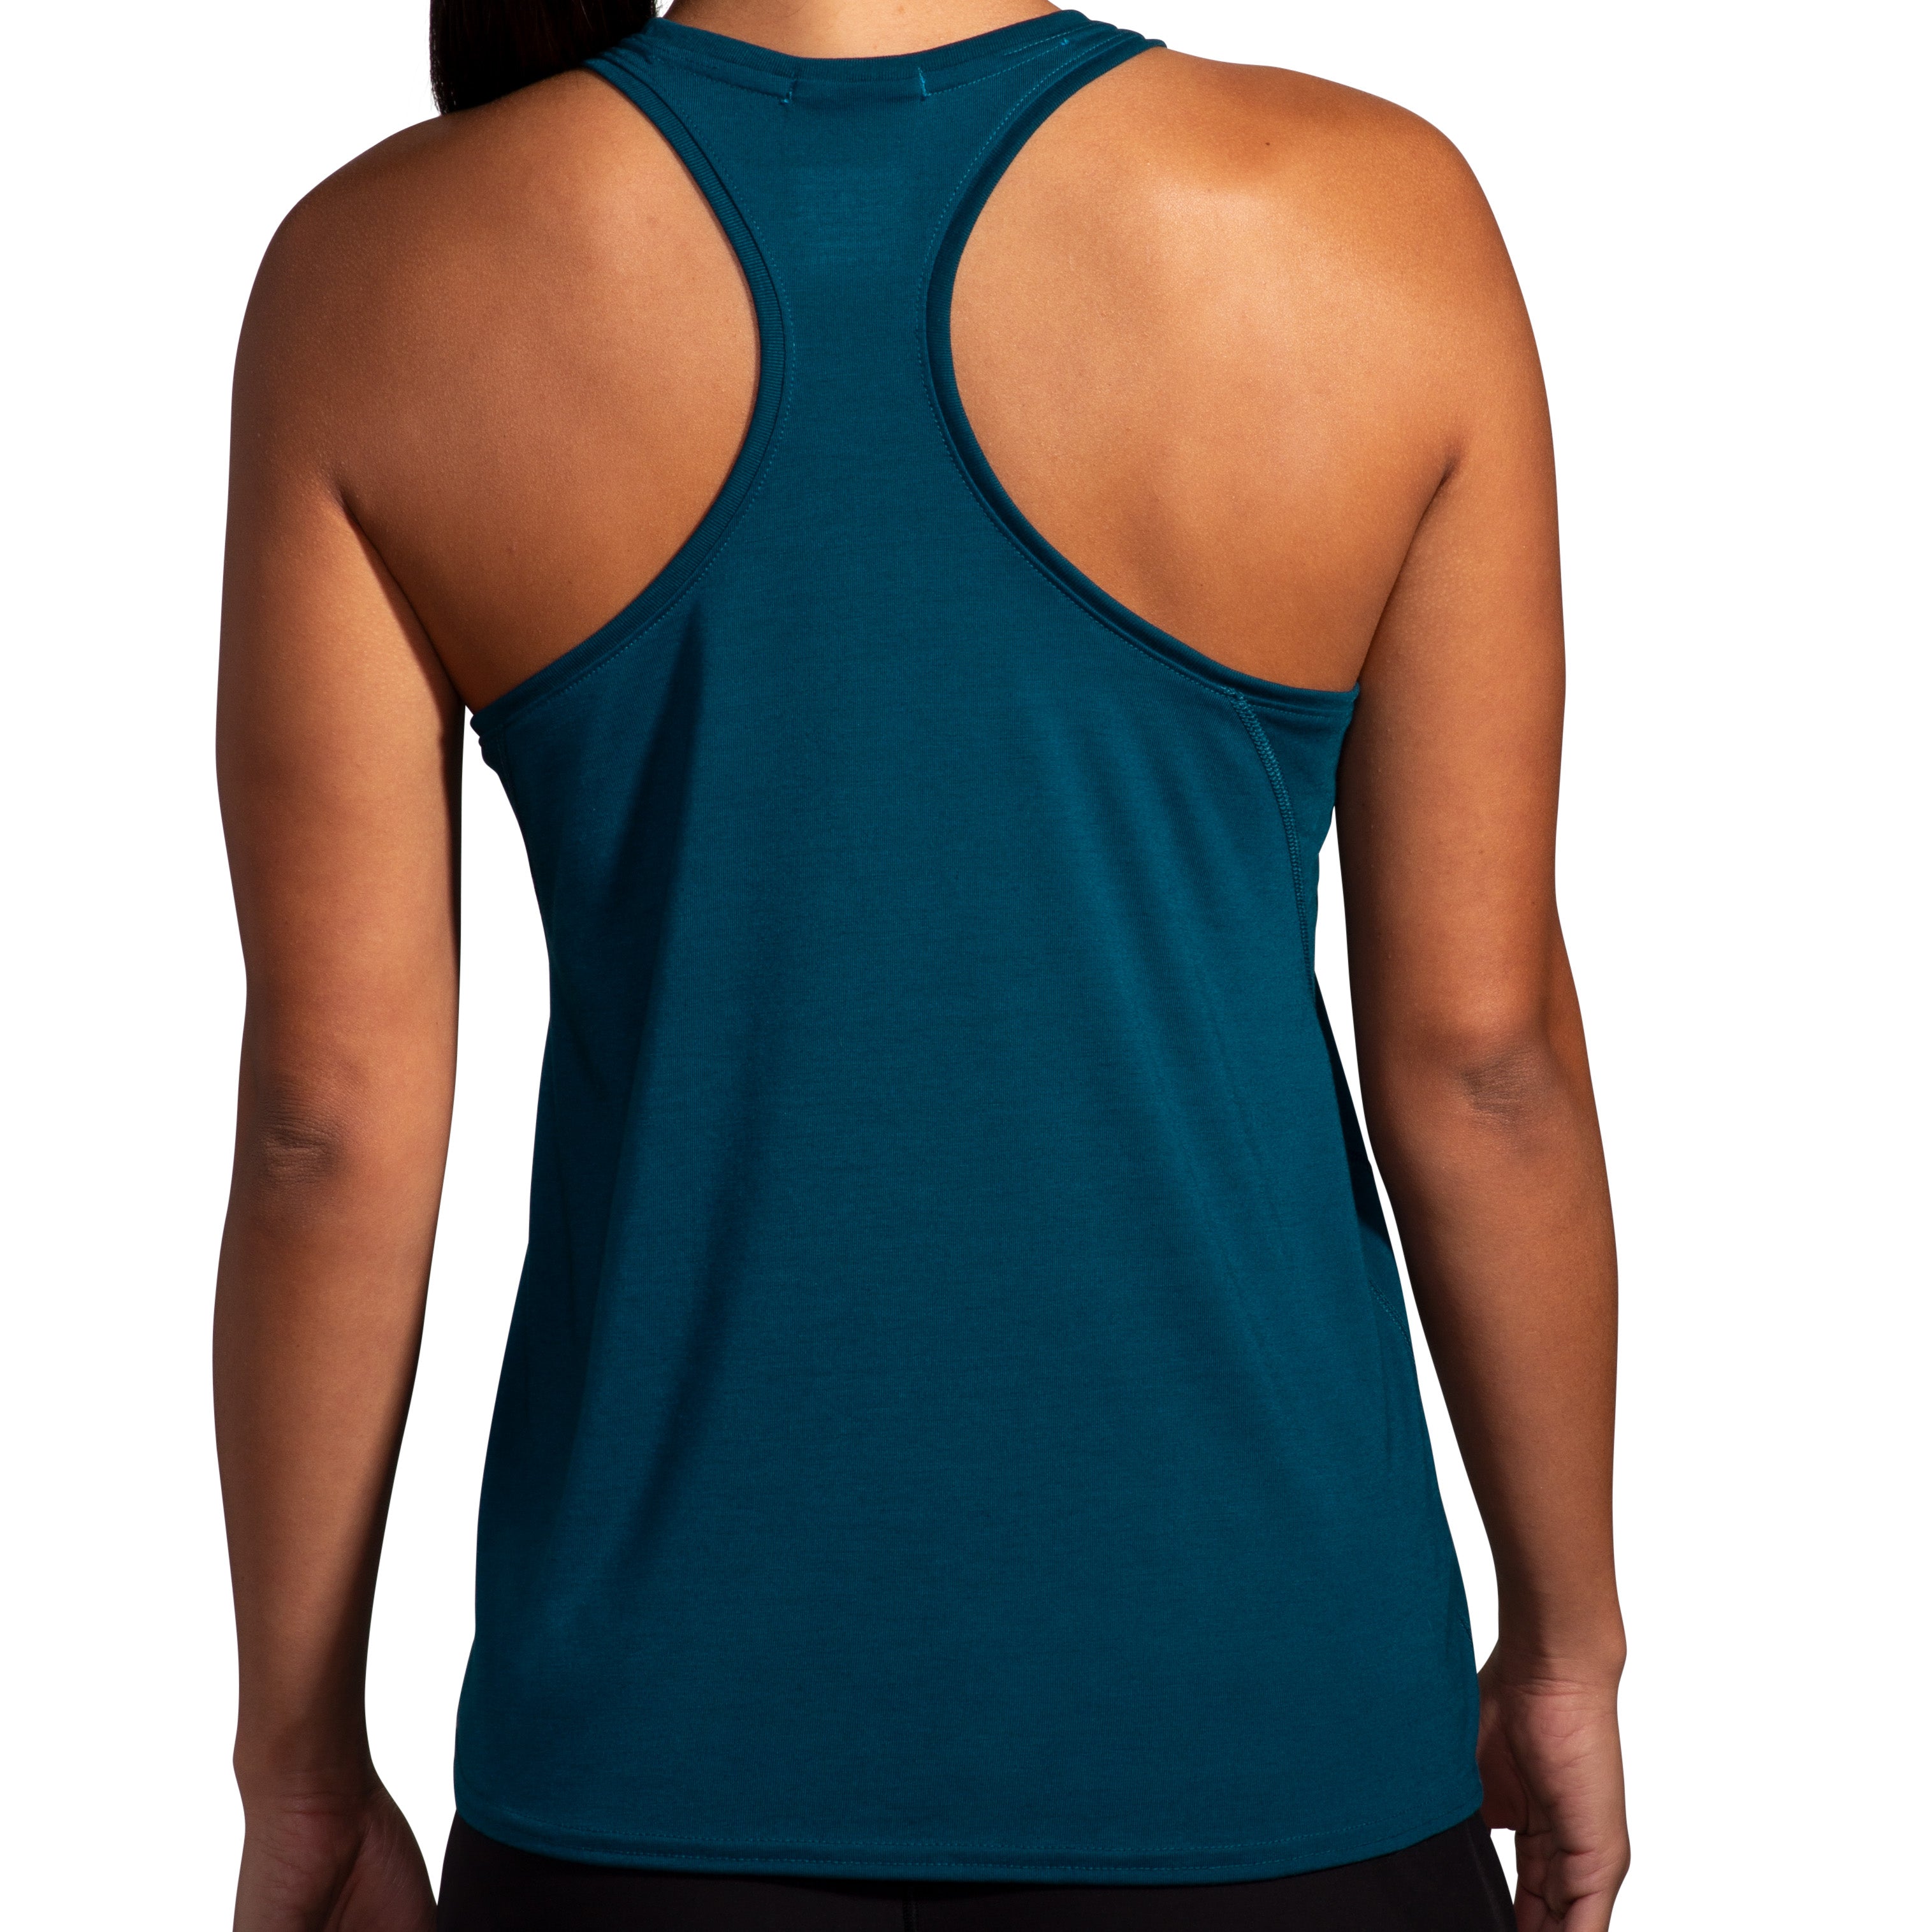 Men's Sleeveless Workout Shirts Quick Dry Athletic Tanks - Heather Sky Blue  / S